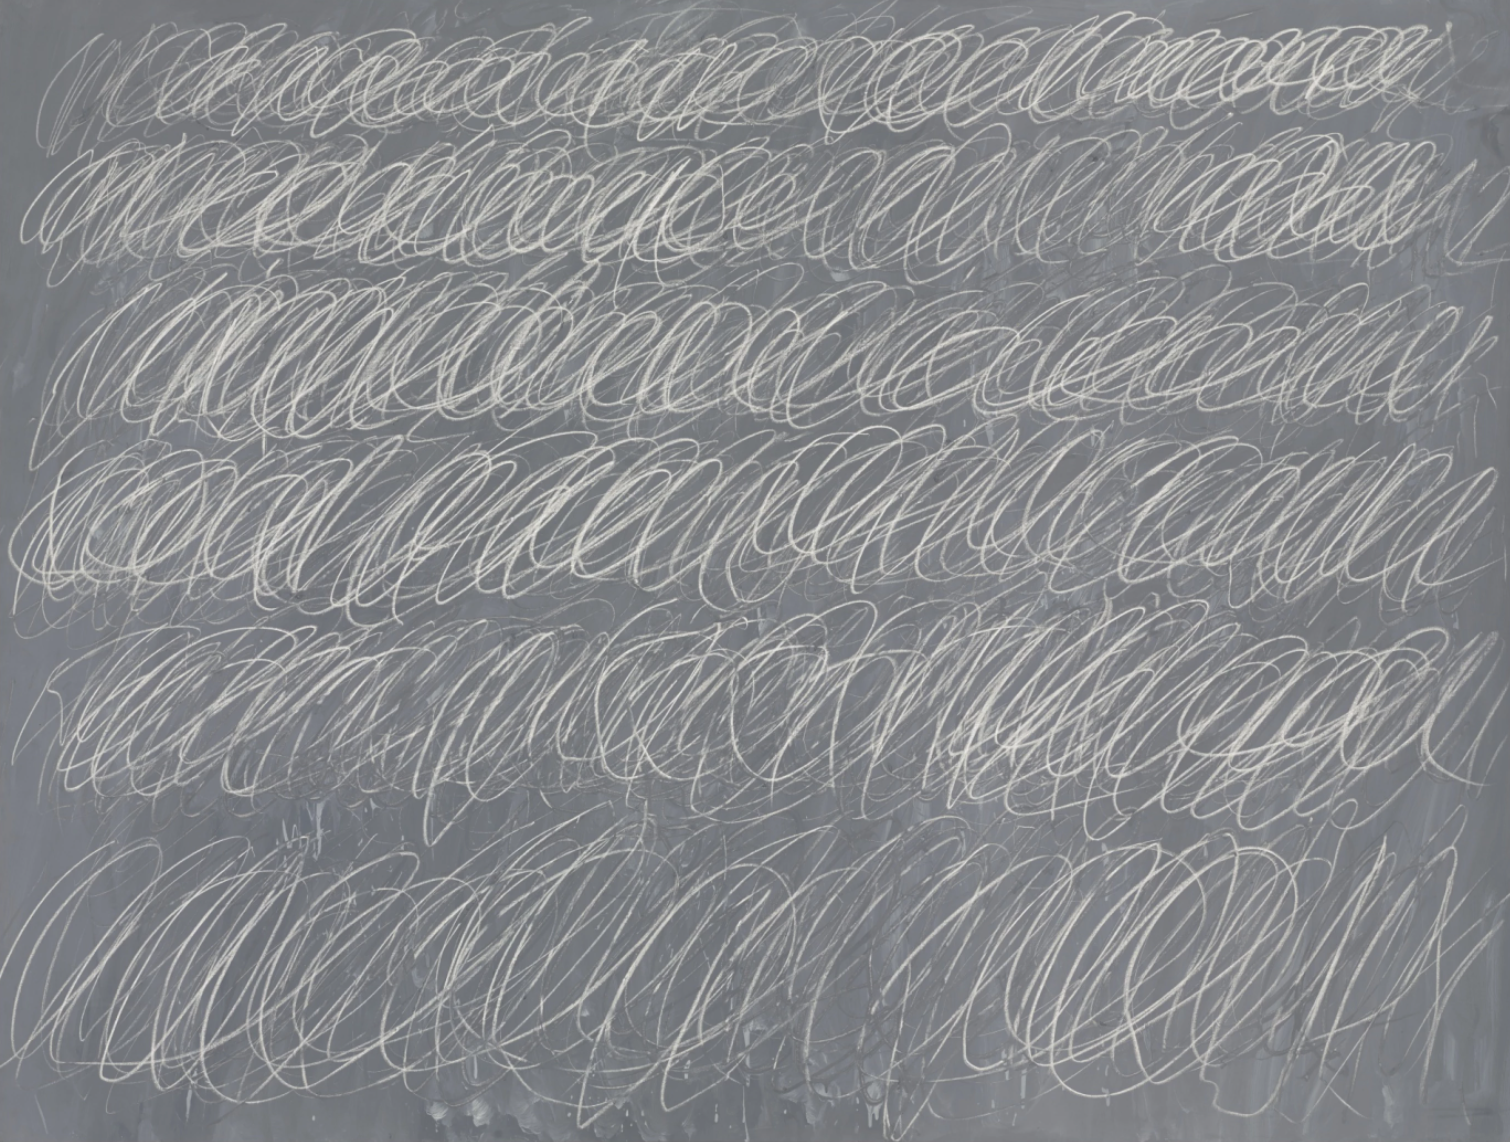 22untitled22-new-york-city-1968-cy-twombly-tranh-ve-nguech-ngoac-gia-705-trieu-usd-1652373260.png